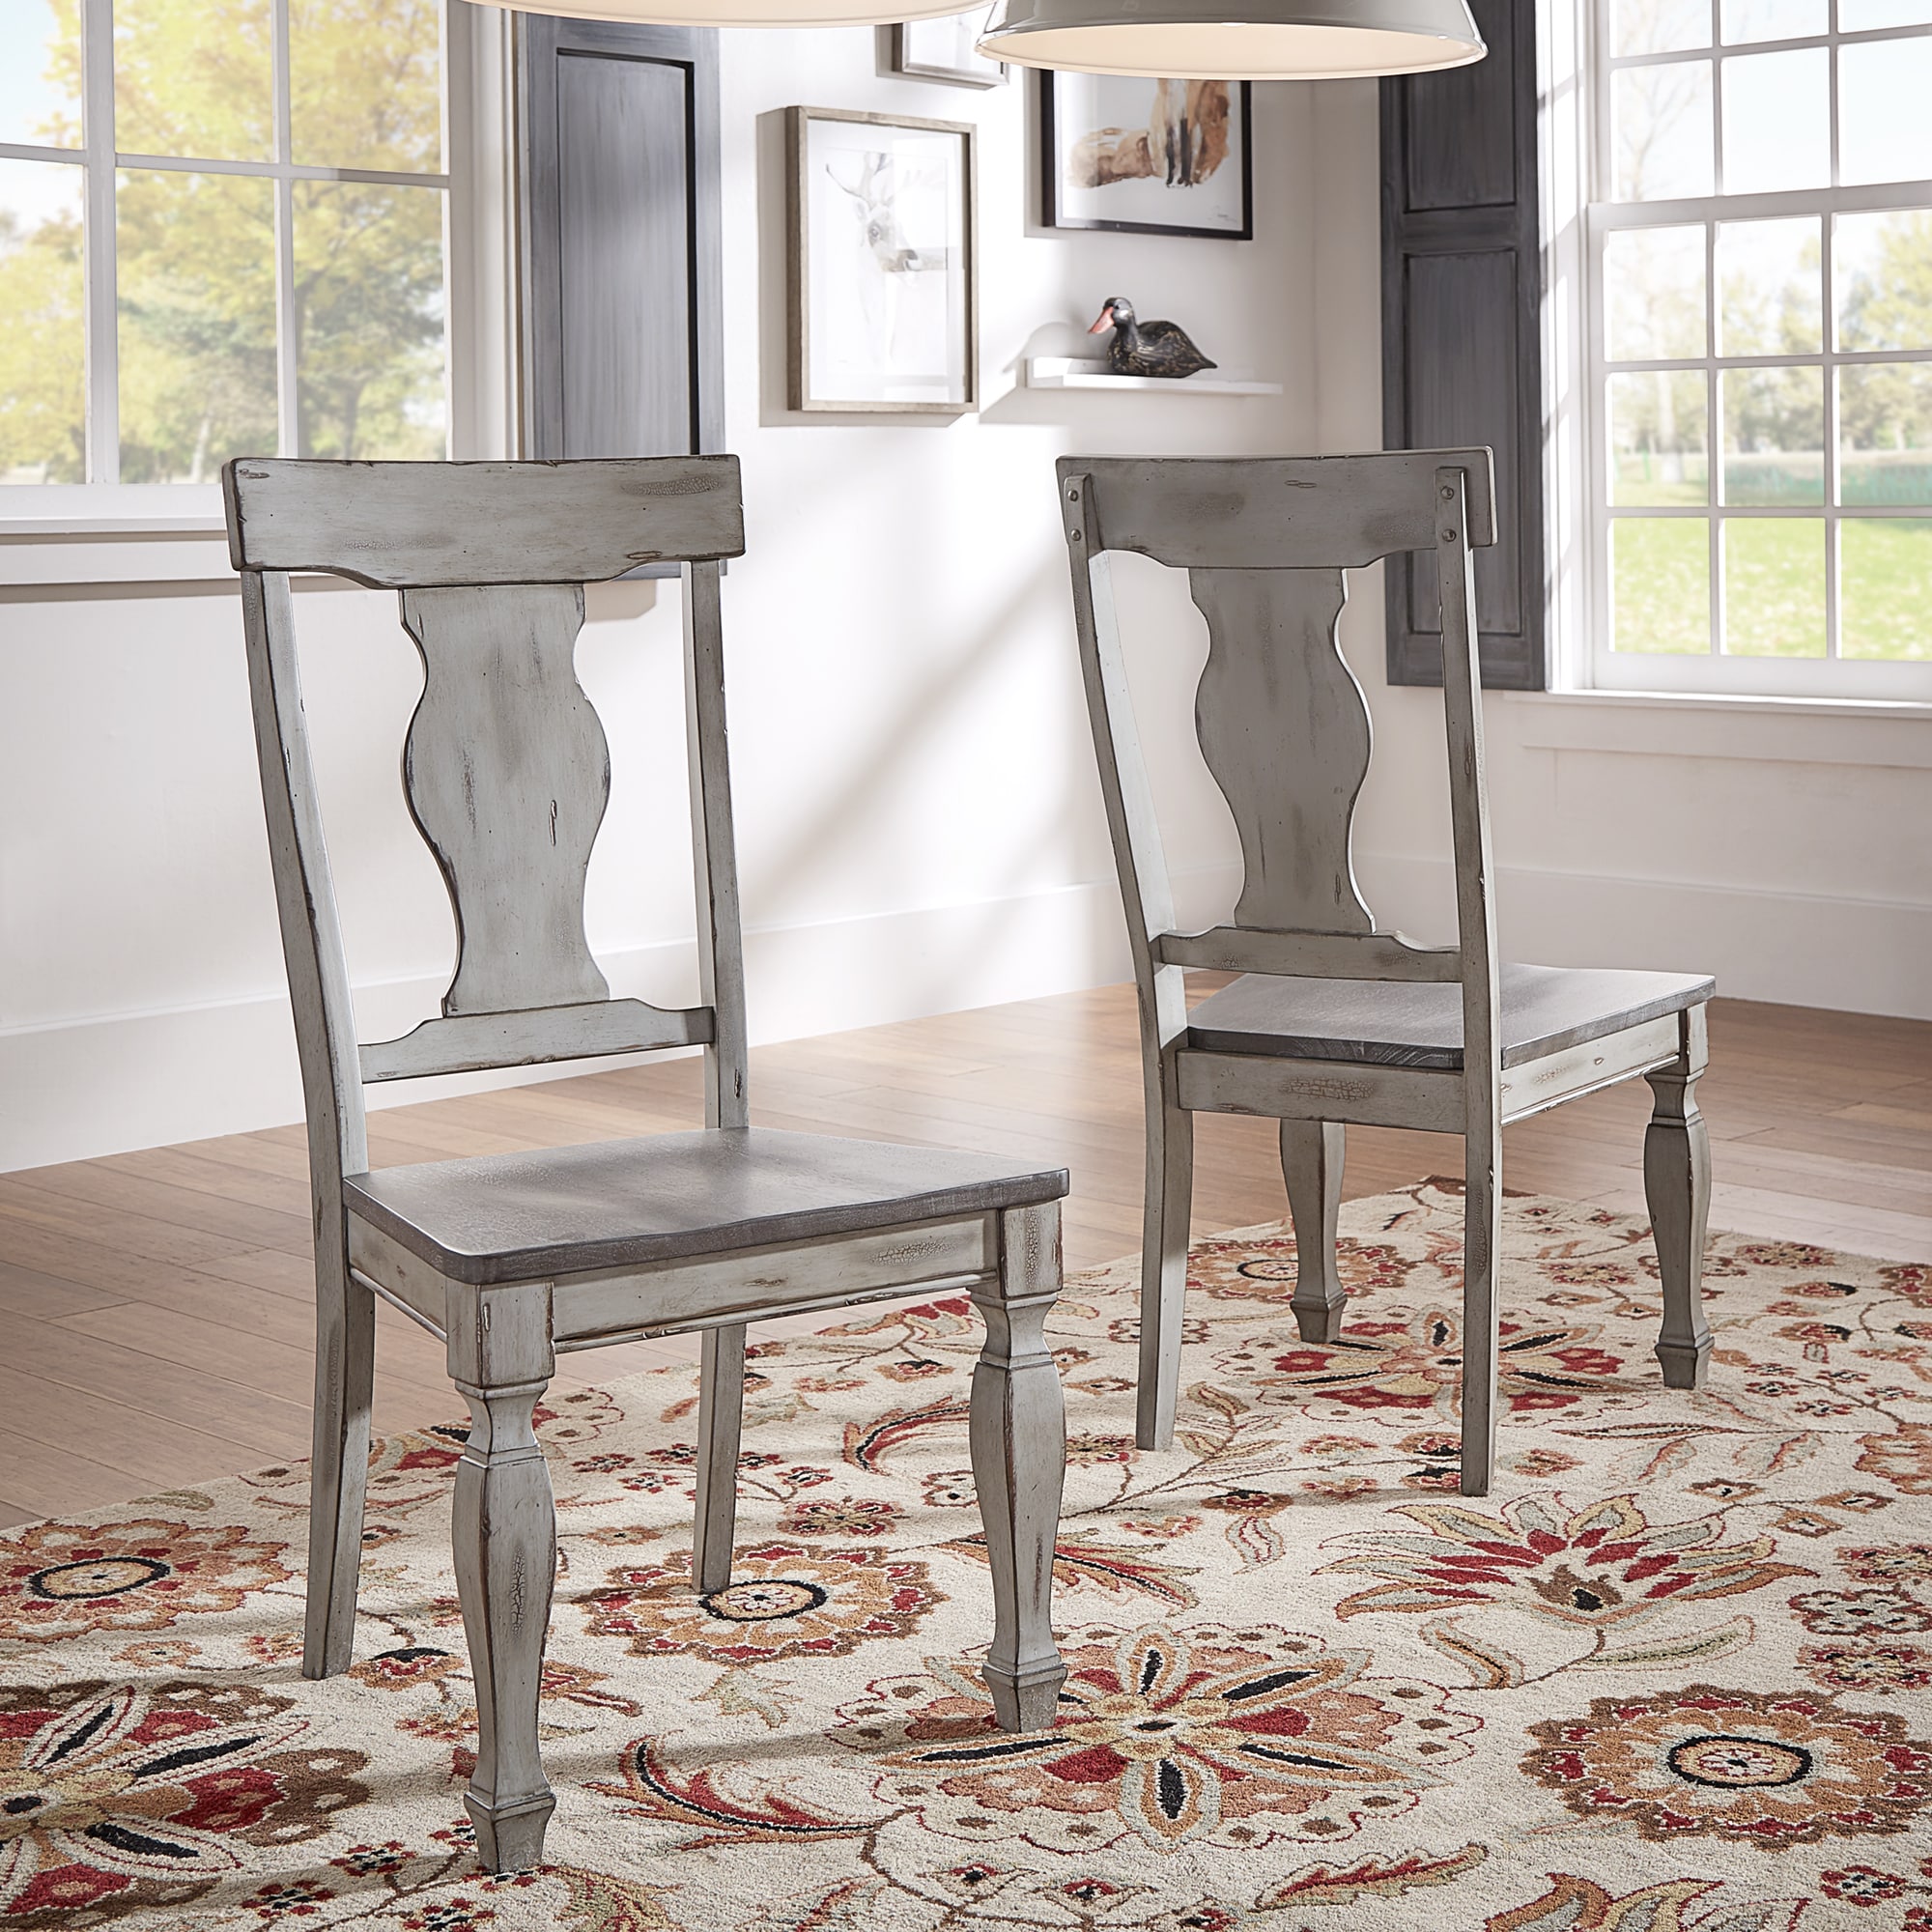 Eleanor Grey Two Tone Square Turned Leg Wood Dining Chairs Set Of 2 By Inspire Q Classic On Sale Overstock 14043683